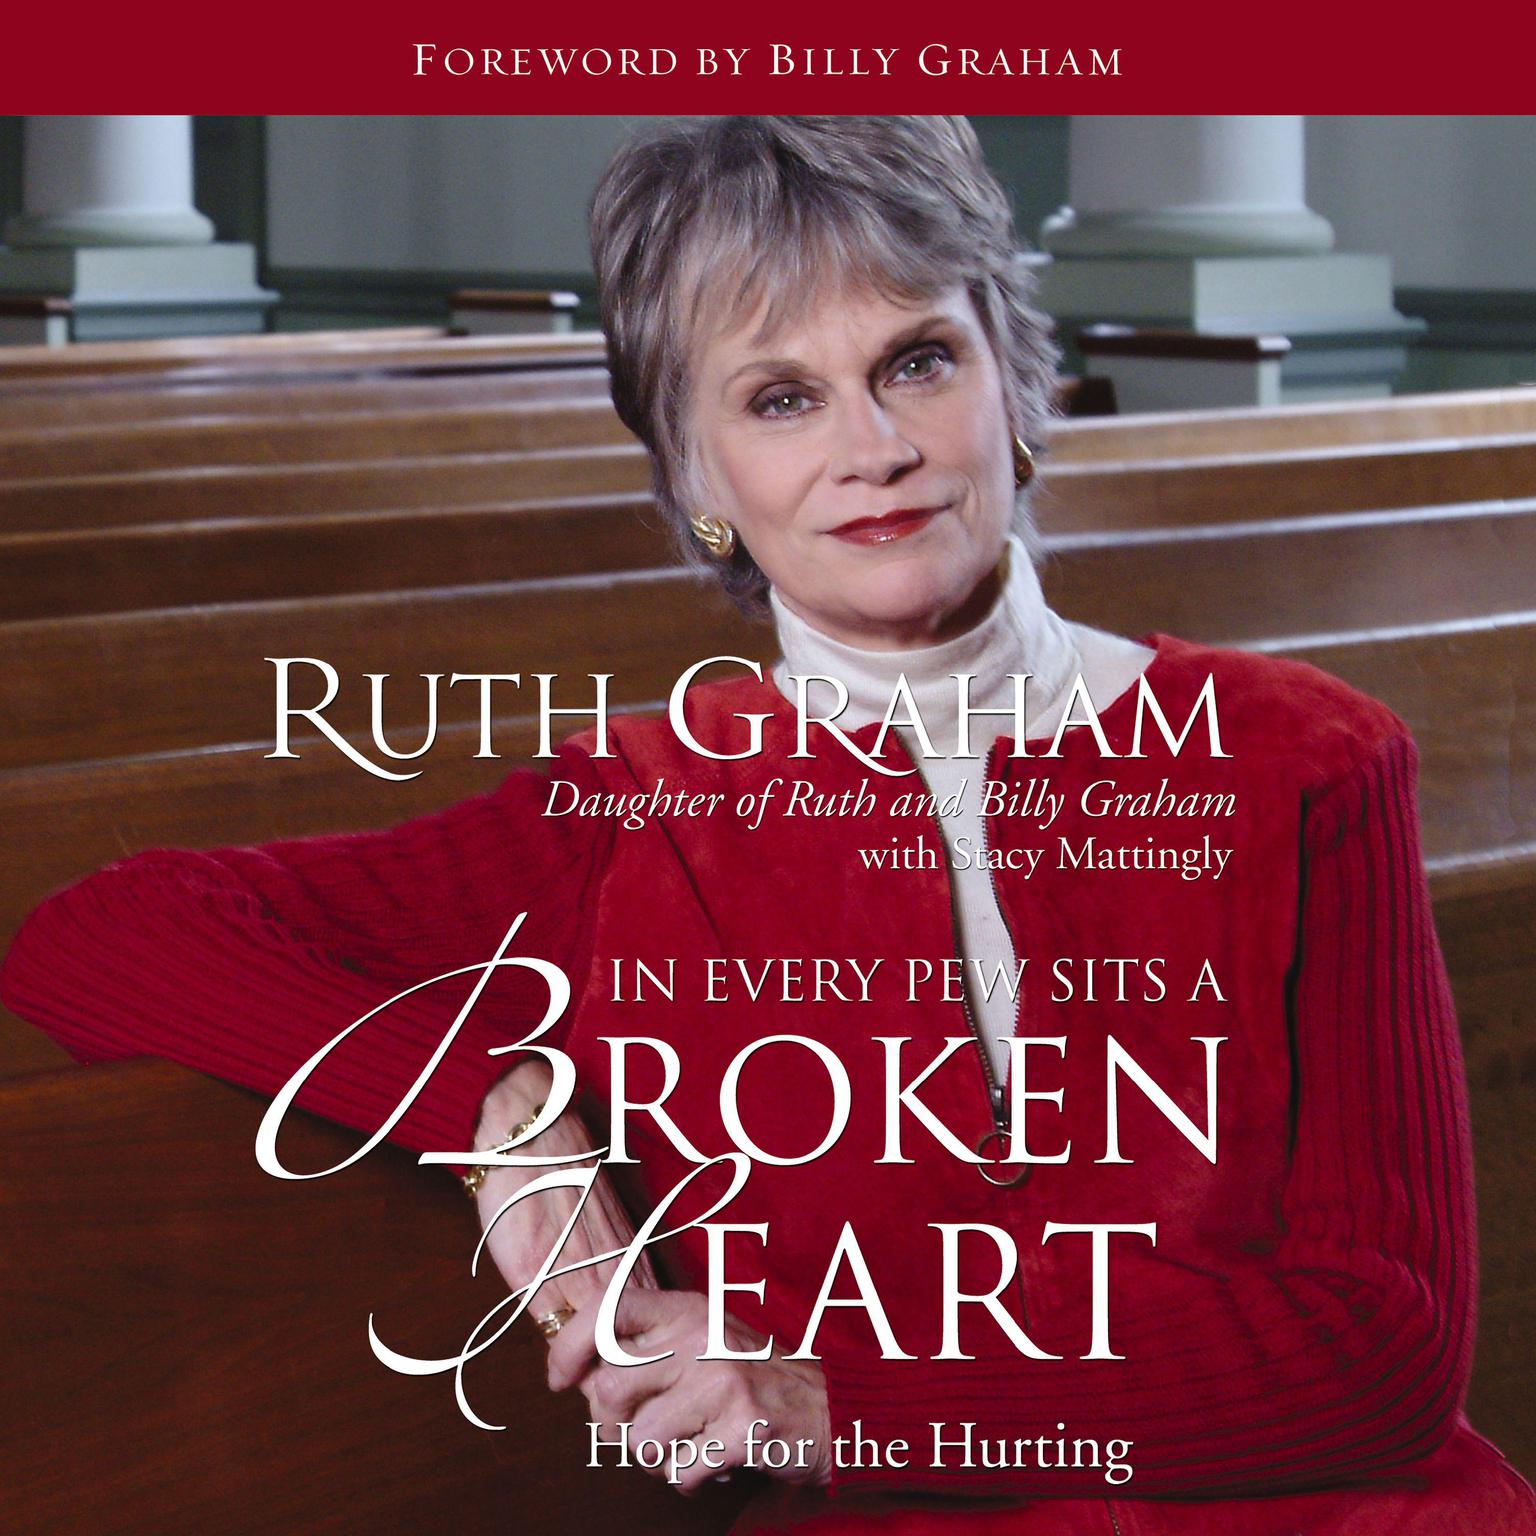 In Every Pew Sits a Broken Heart (Abridged): Hope for the Hurting  Audiobook, by Ruth Graham